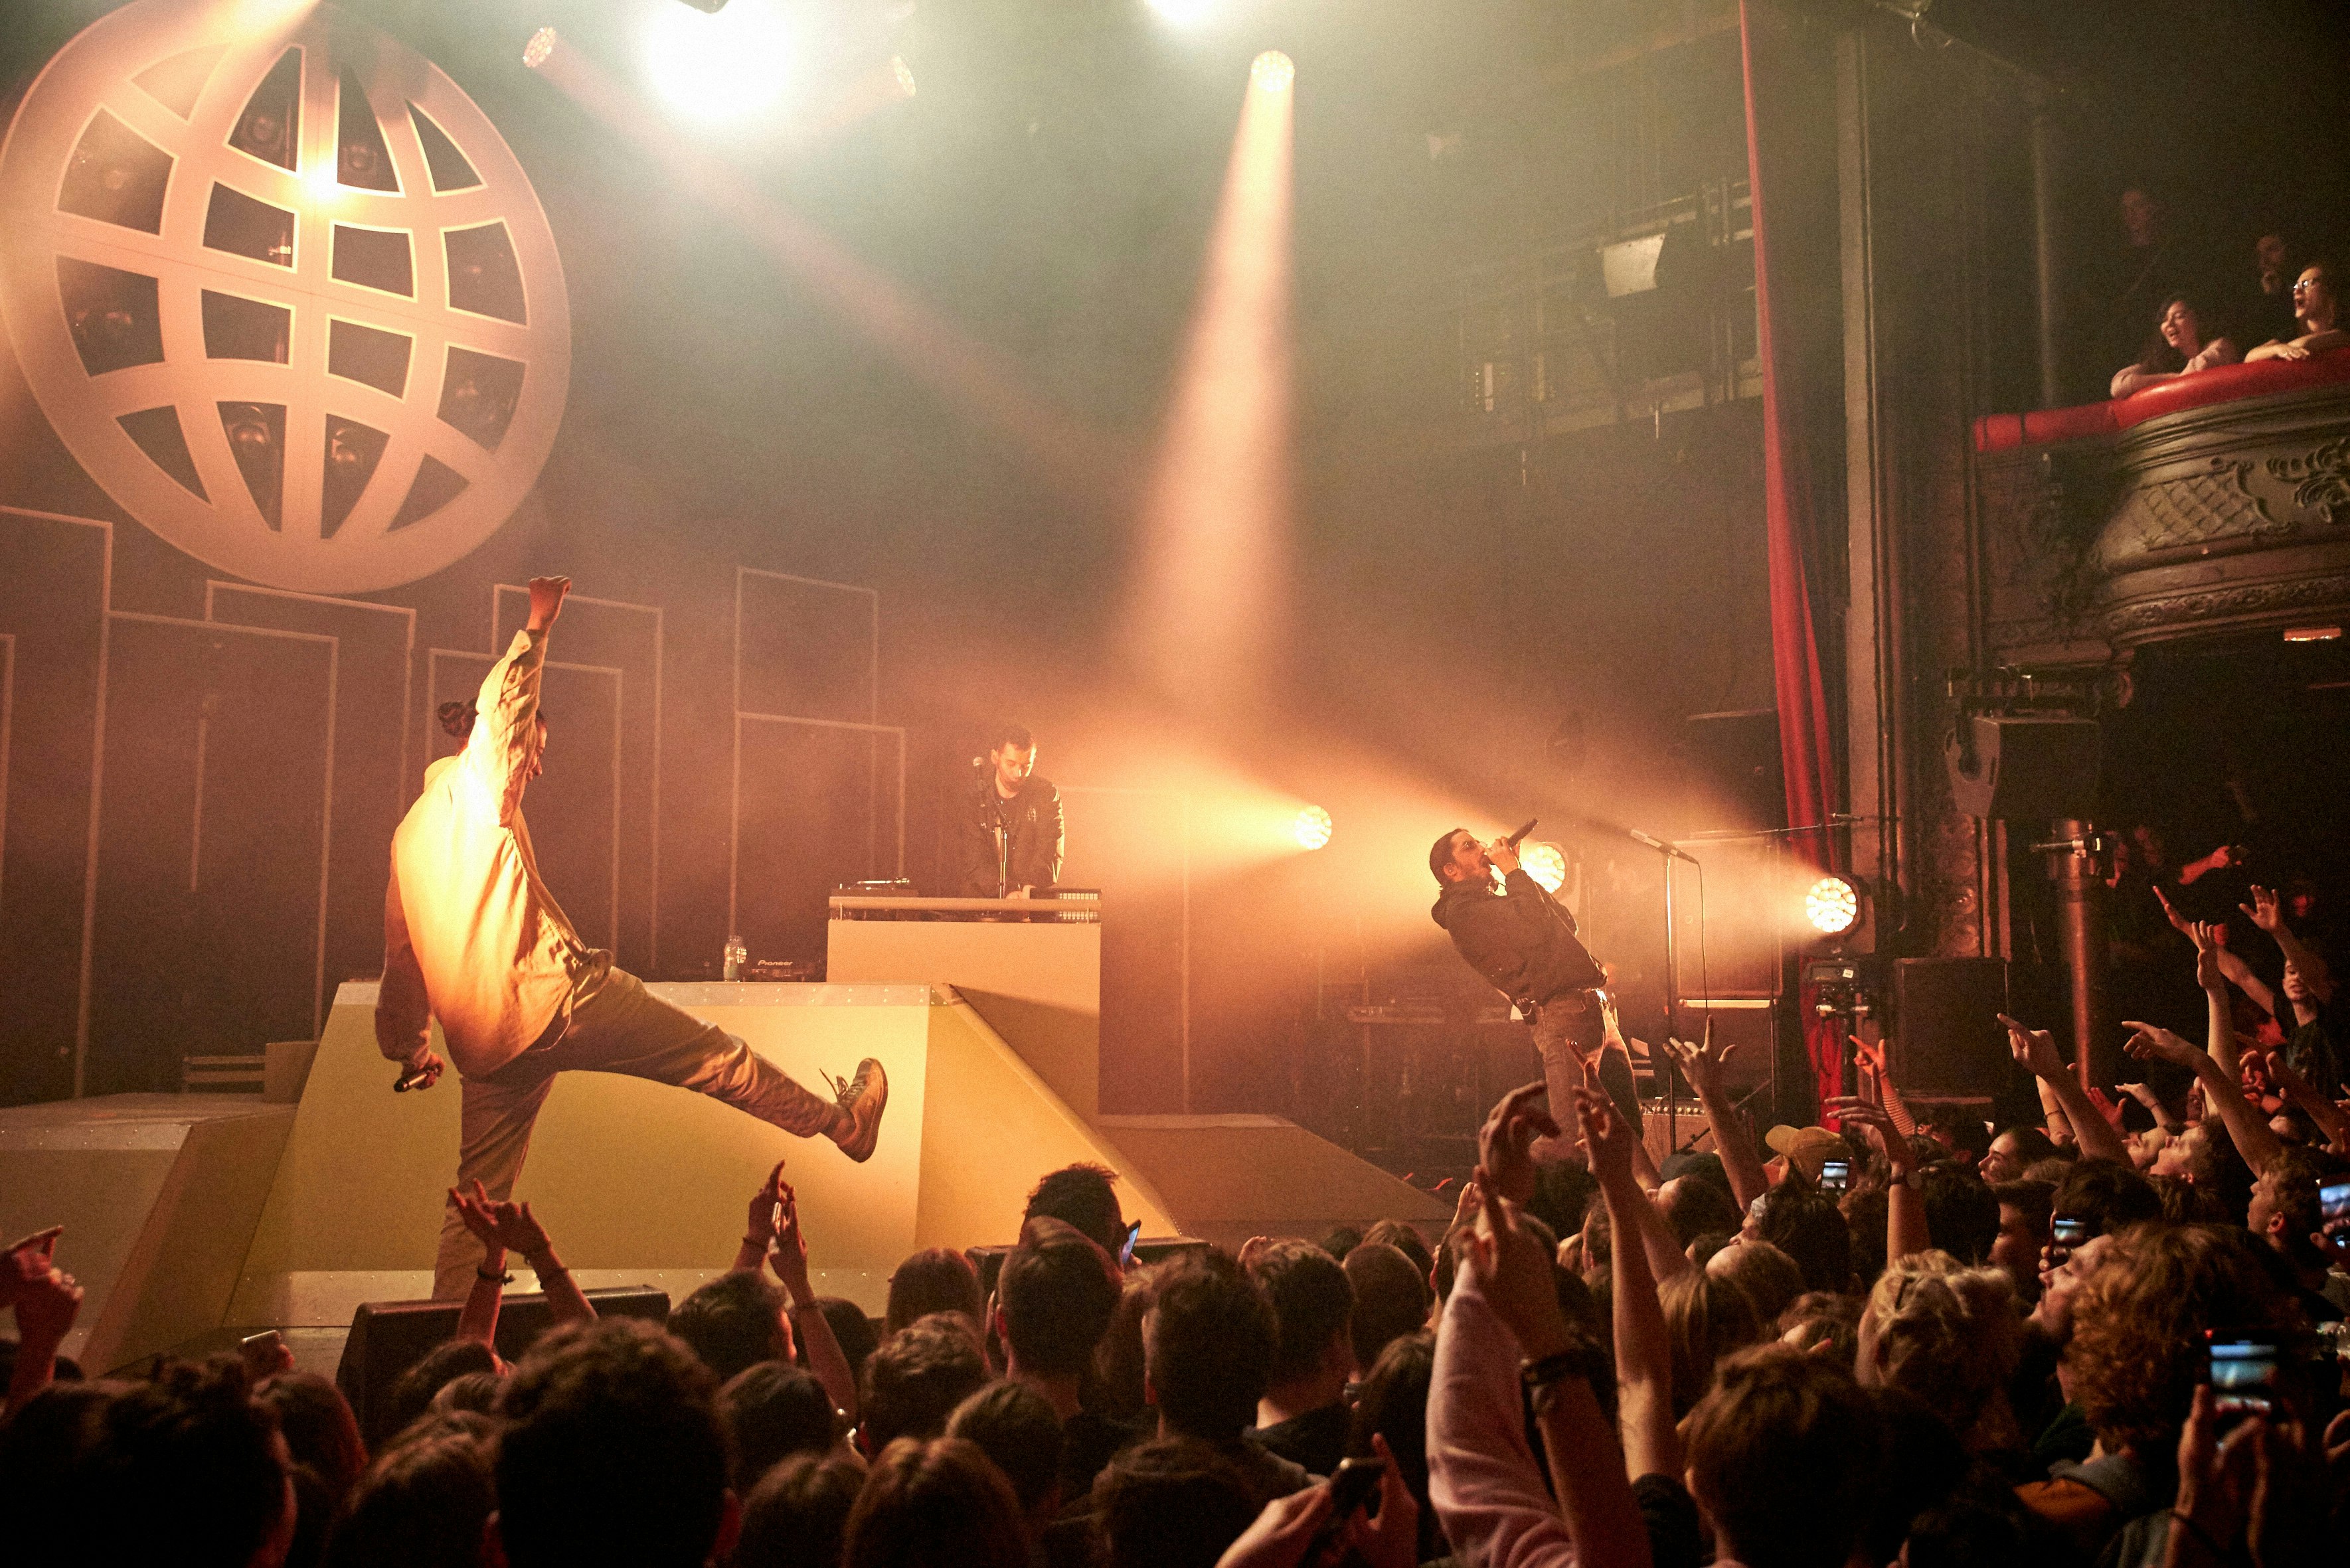 A rap group performs on the stage of La Cigale in Paris. An animated crowd, in shadow beneath the stage, watch on.